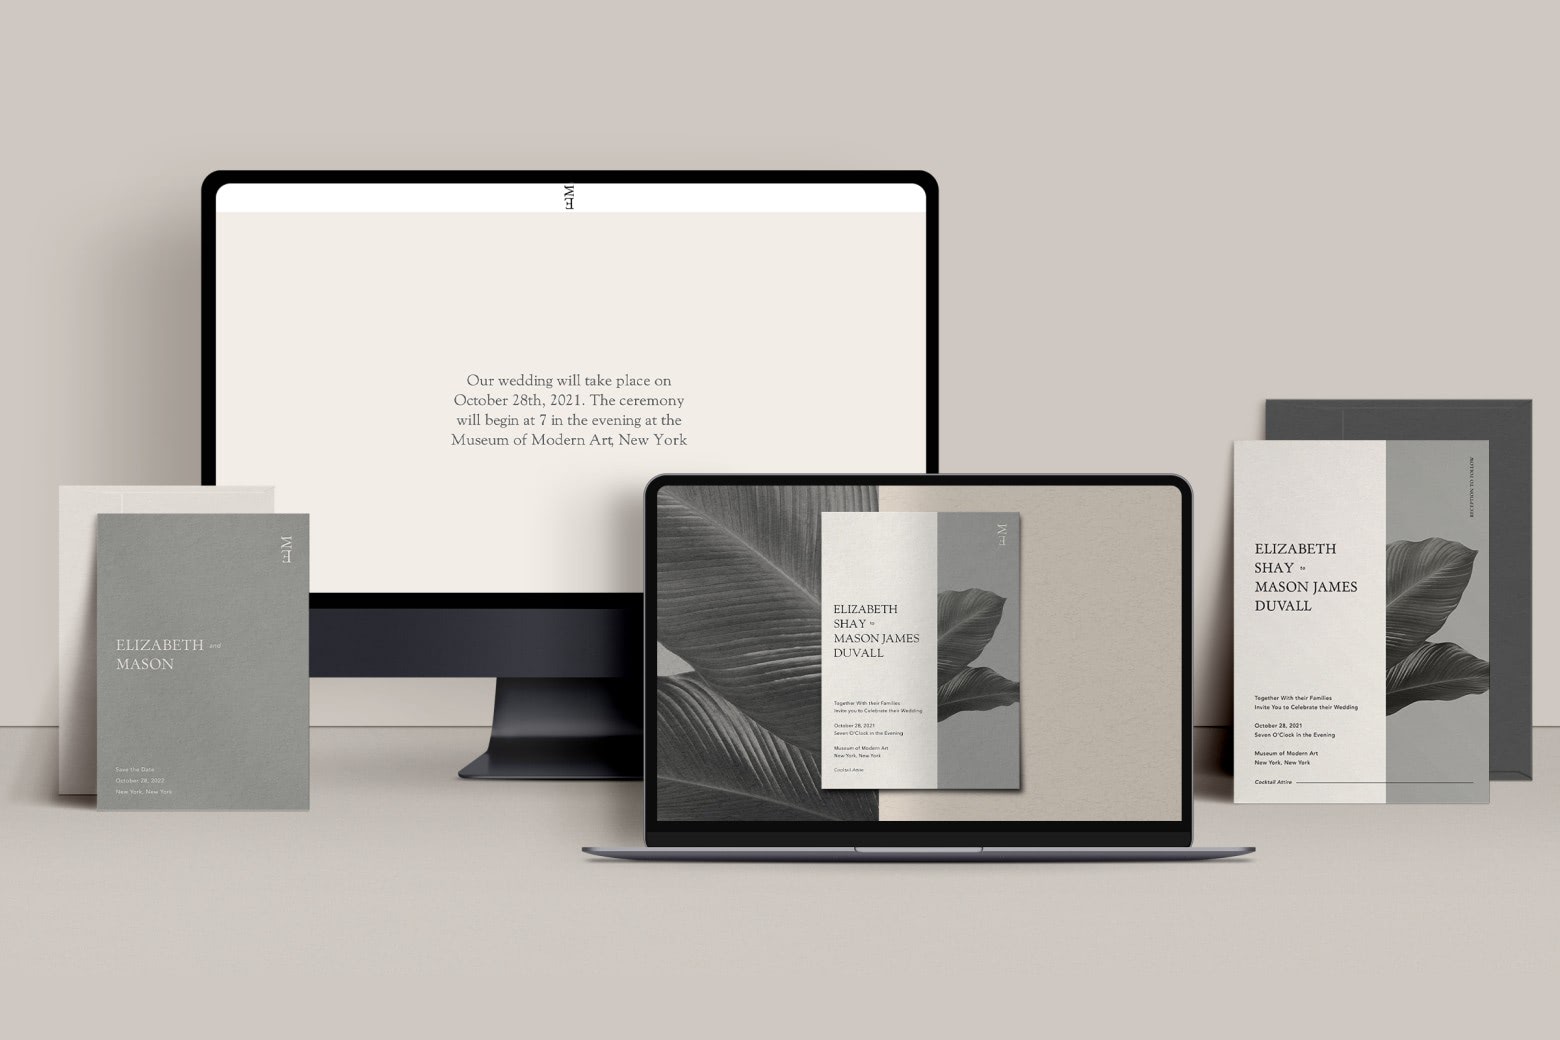 A monitor, laptop screen and printed stationery, all with a gray and white color scheme and leaf accents